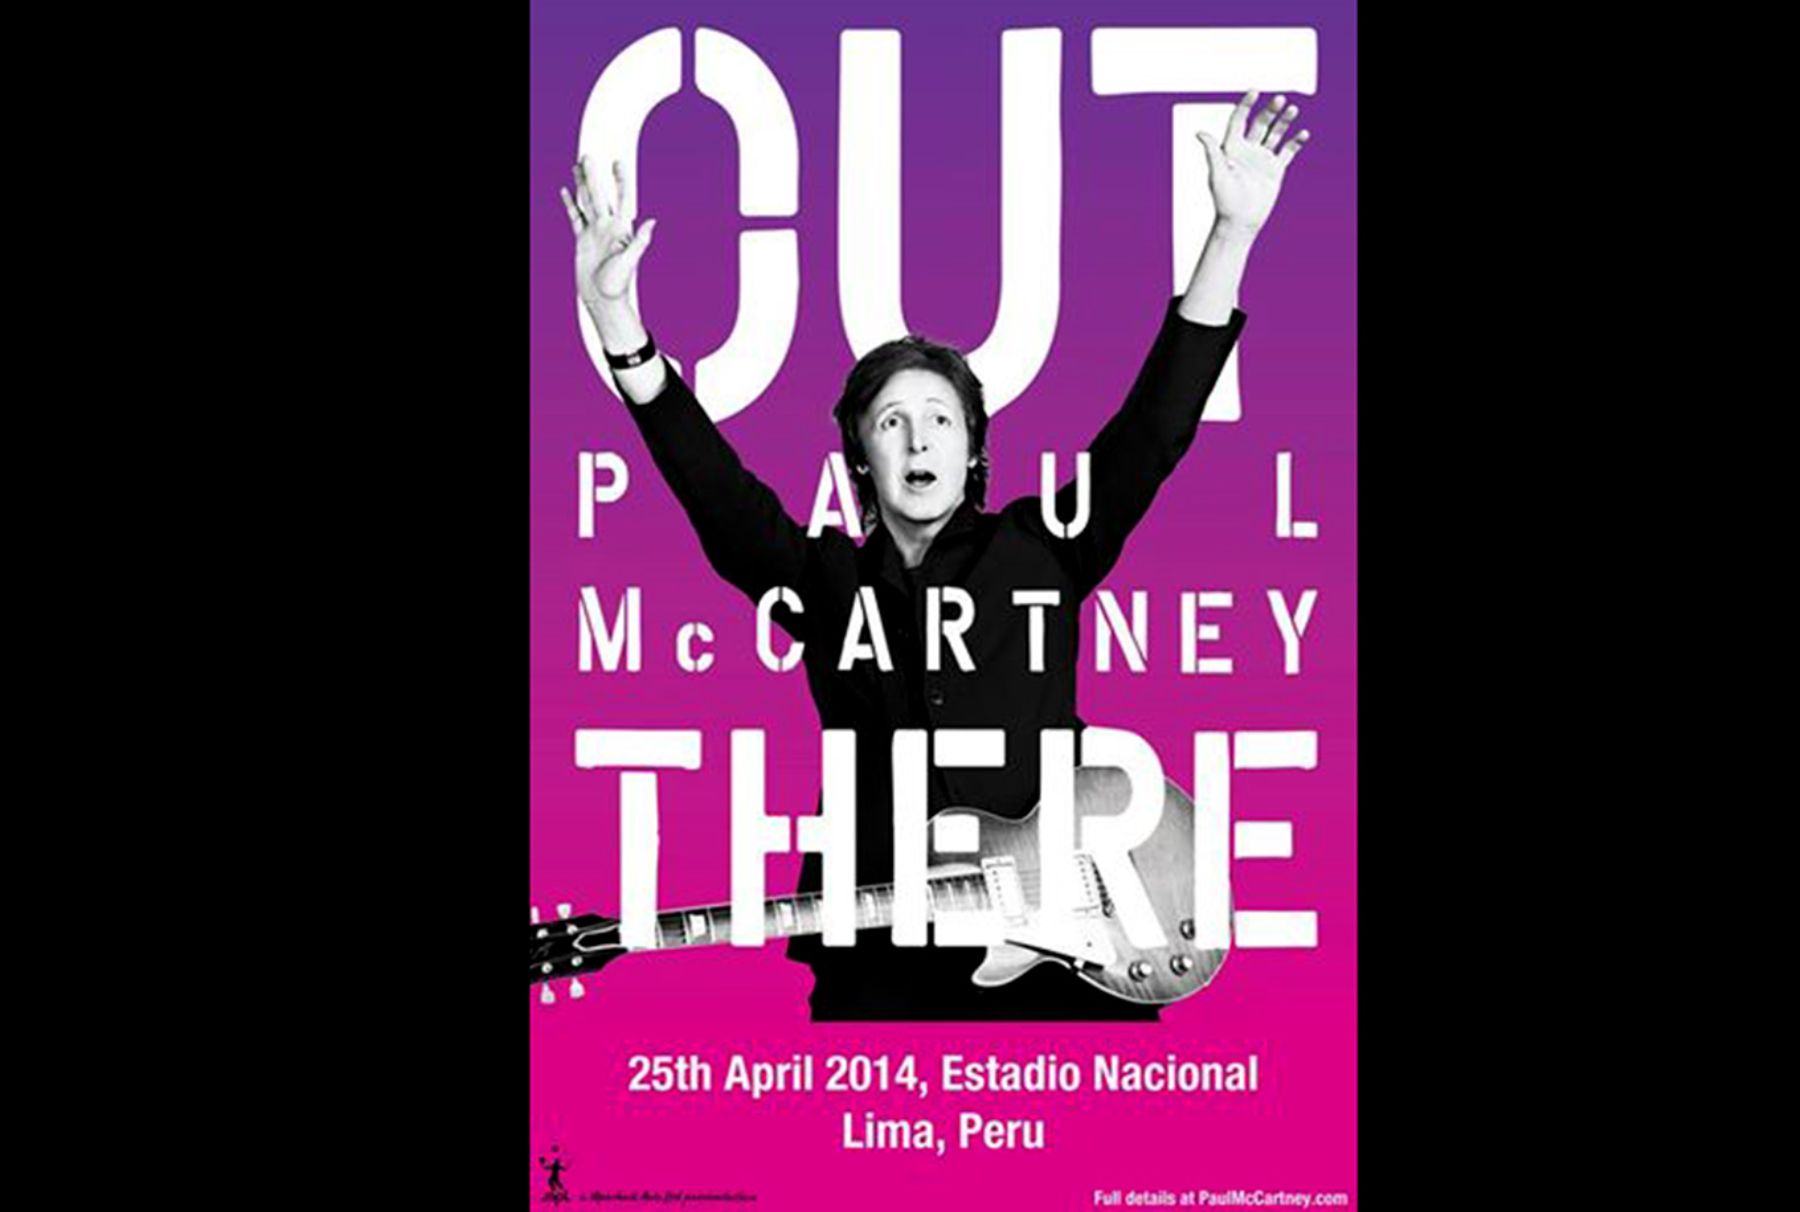 Paul Mc Cartney is set to give a performance in Peru at Lima